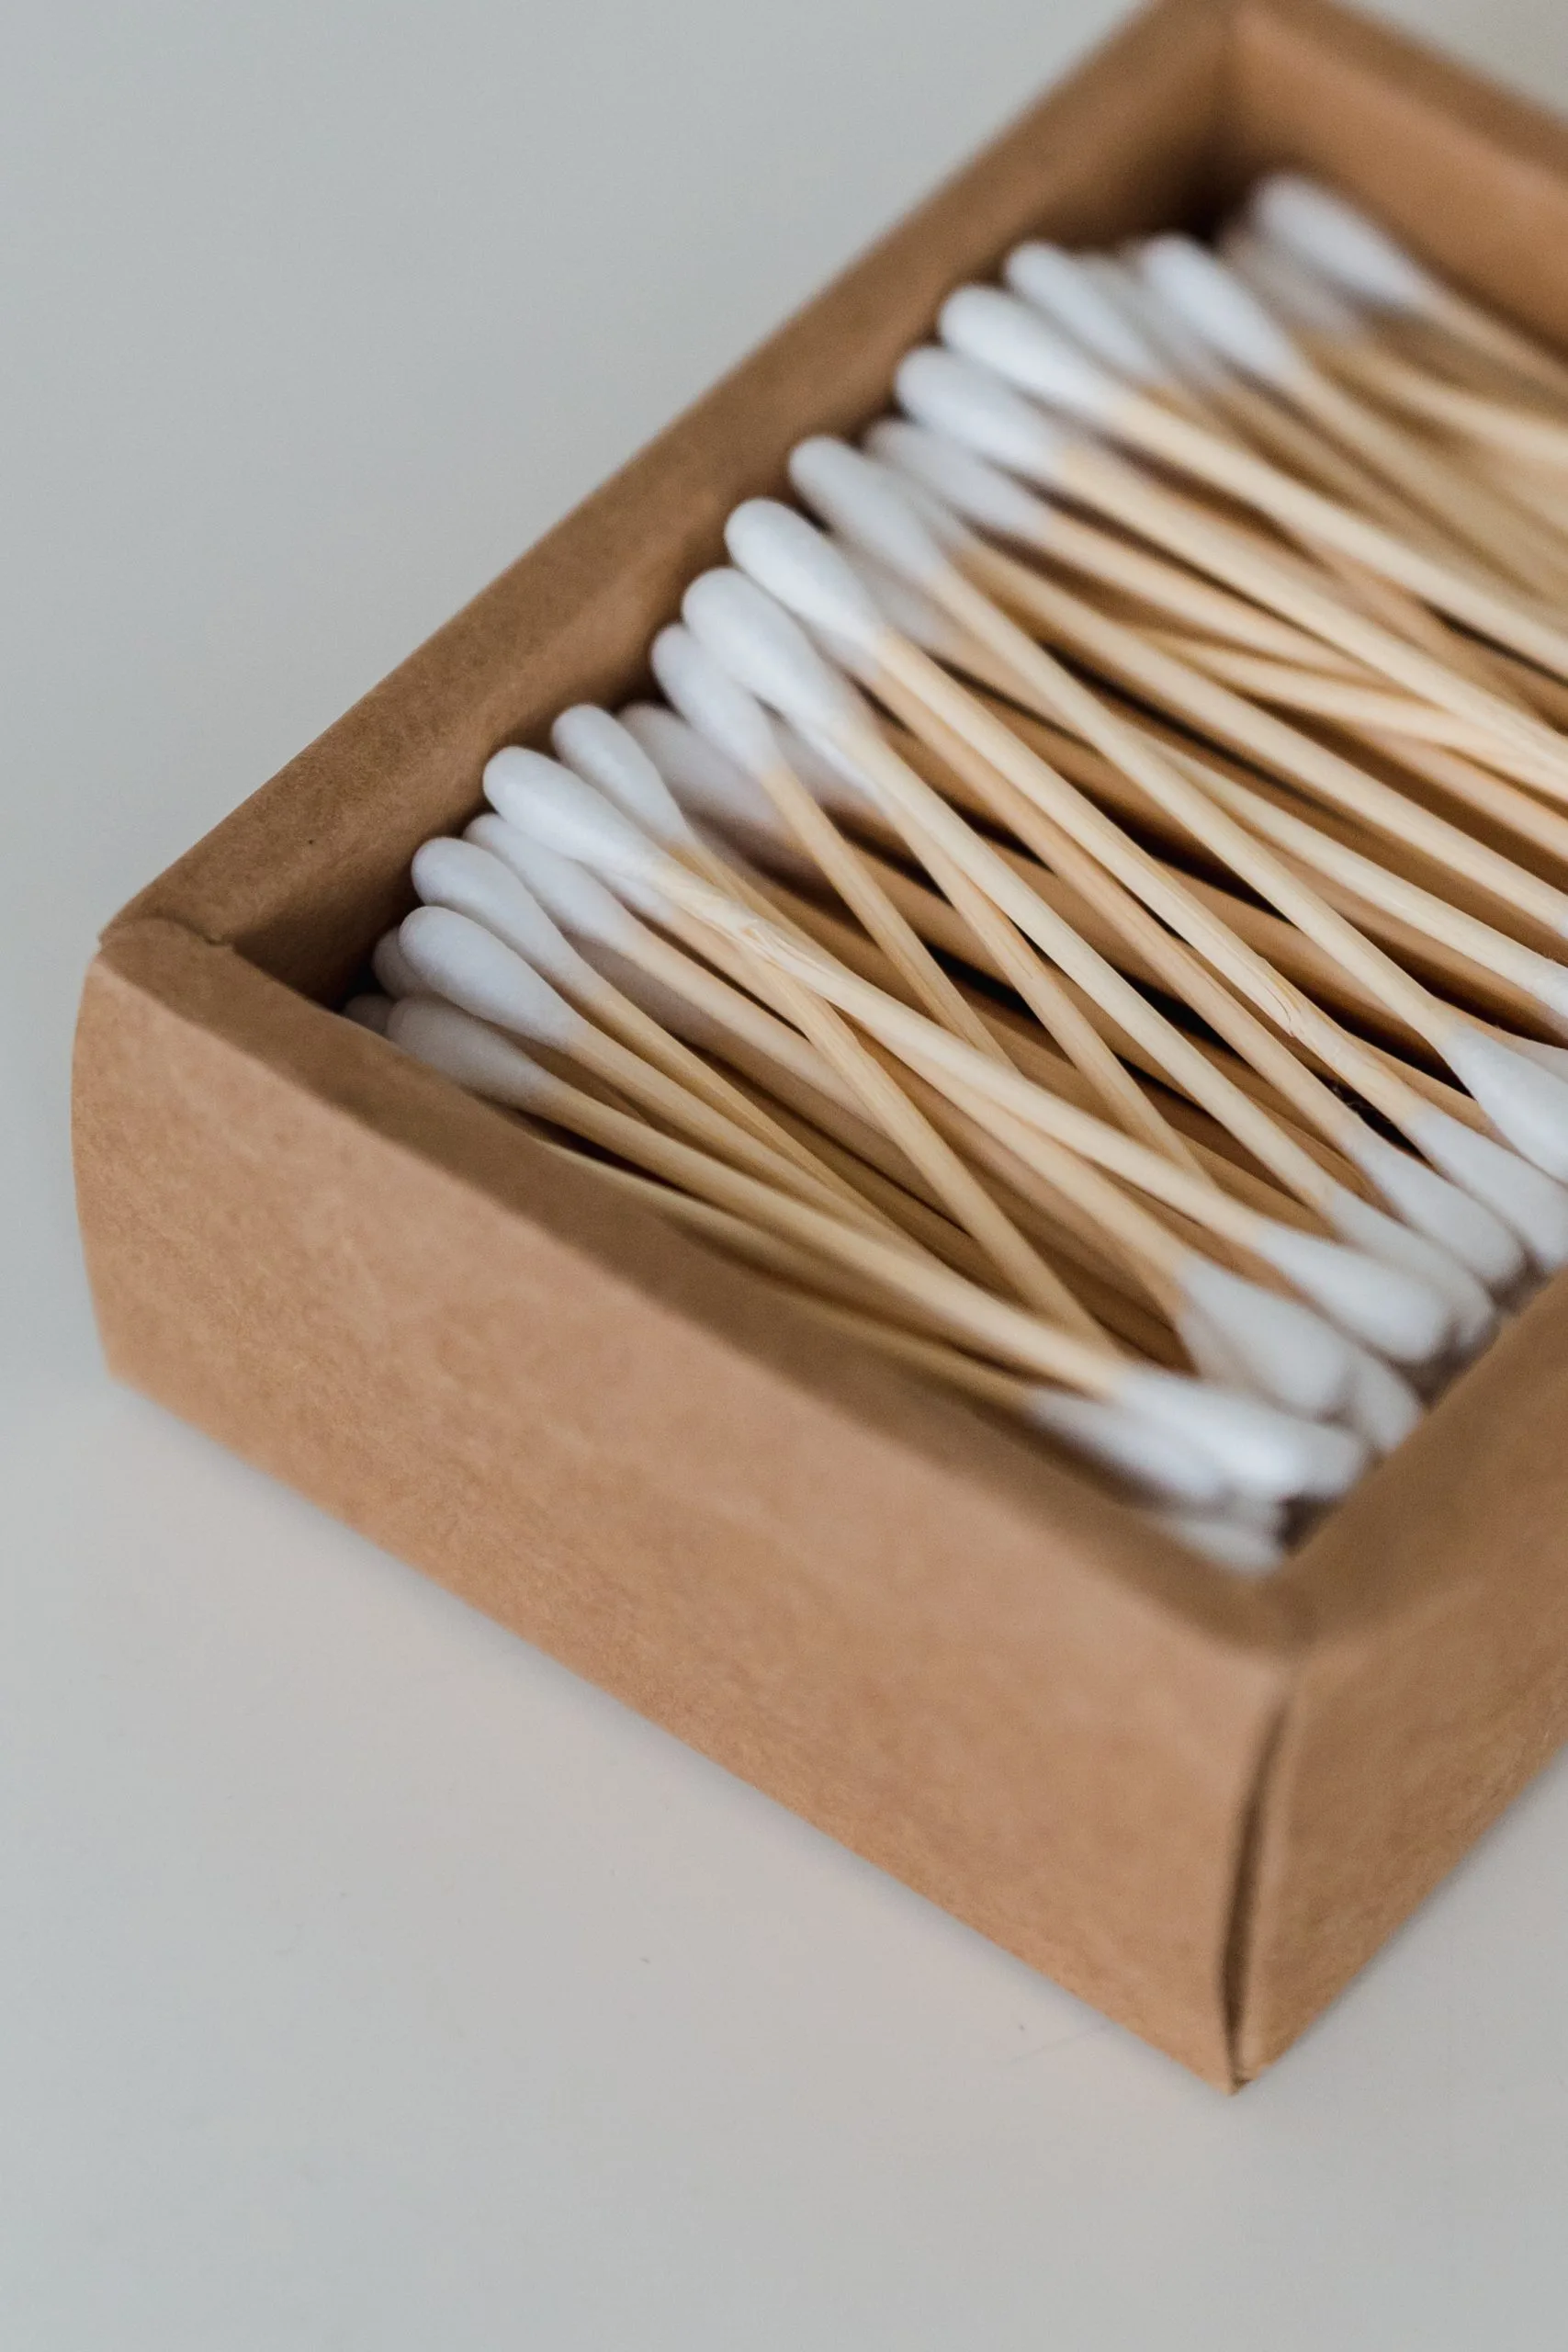 Is It Safe To Use Cotton Swabs To Clean The Inside of Your Ears?